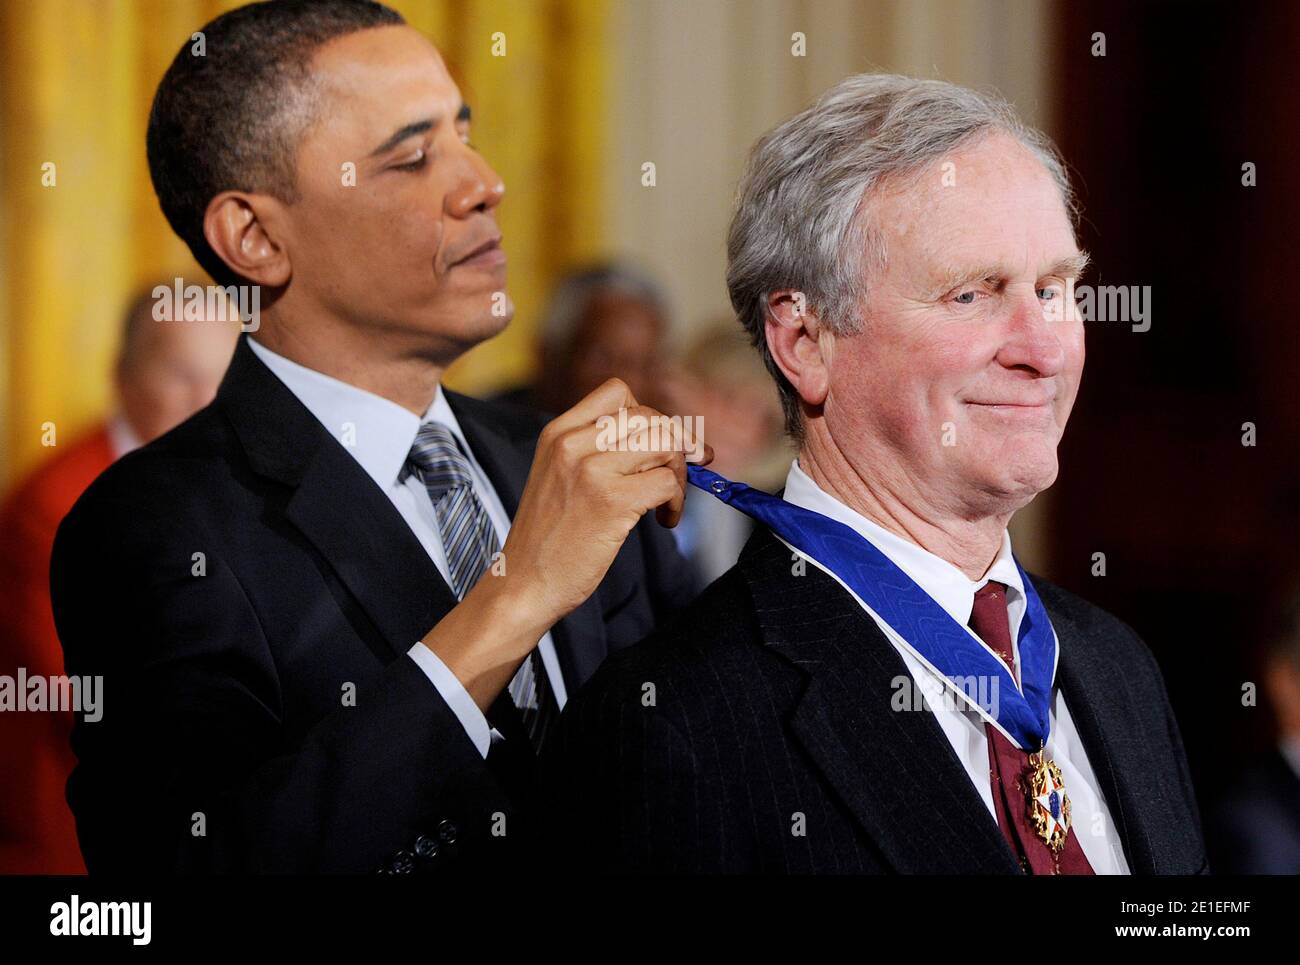 US President Barack Obama honors John H. Adams the 2010 Medal of Freedom in a ceremony of the East Room February 15, 2011 at the White House in Washington, DC. Photo by Olivier Douliery/ABACAPRESS.COM Stock Photo